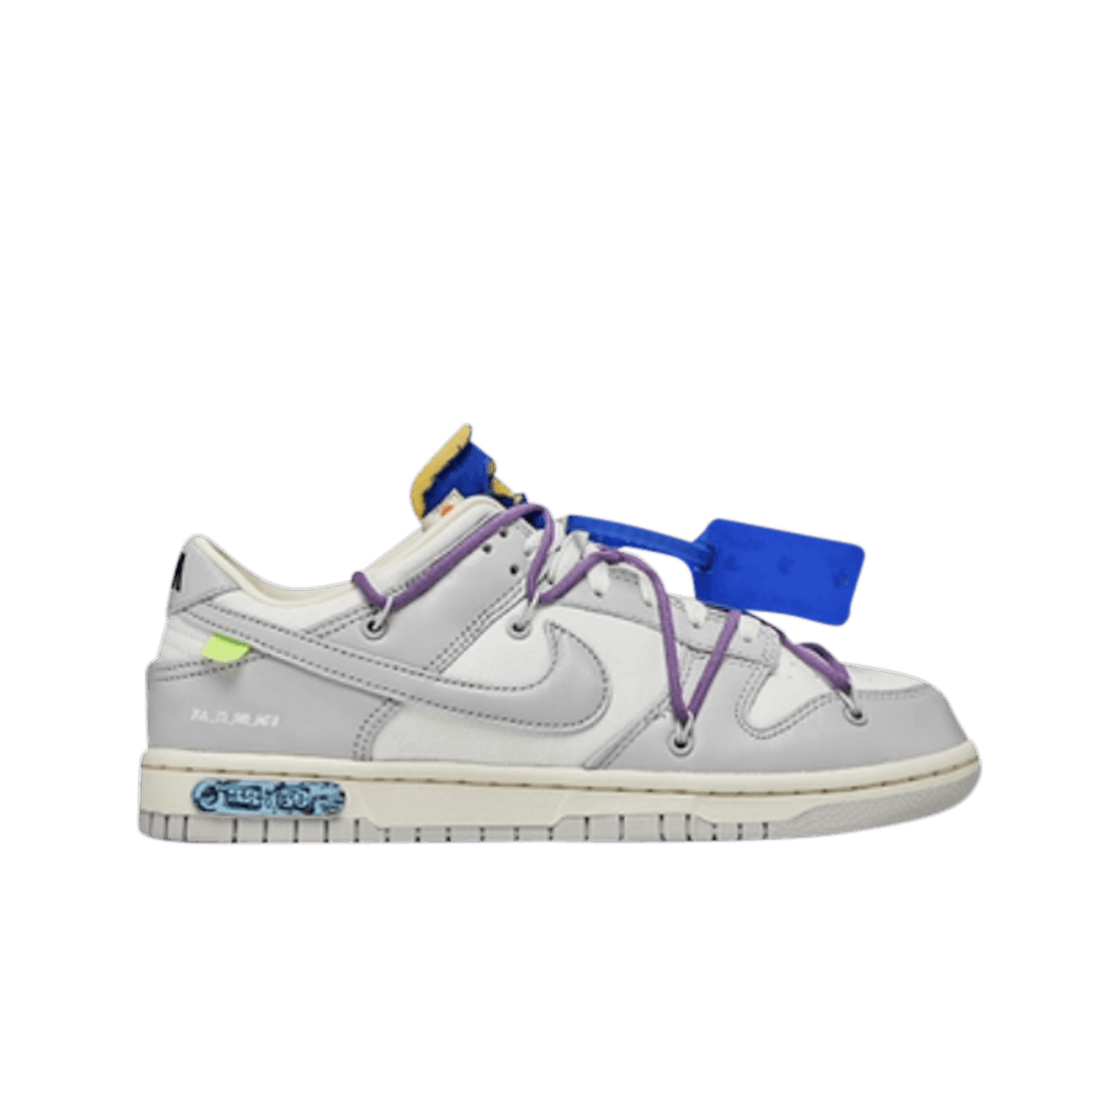 off-white nike dunk 1 lot low of 50 48